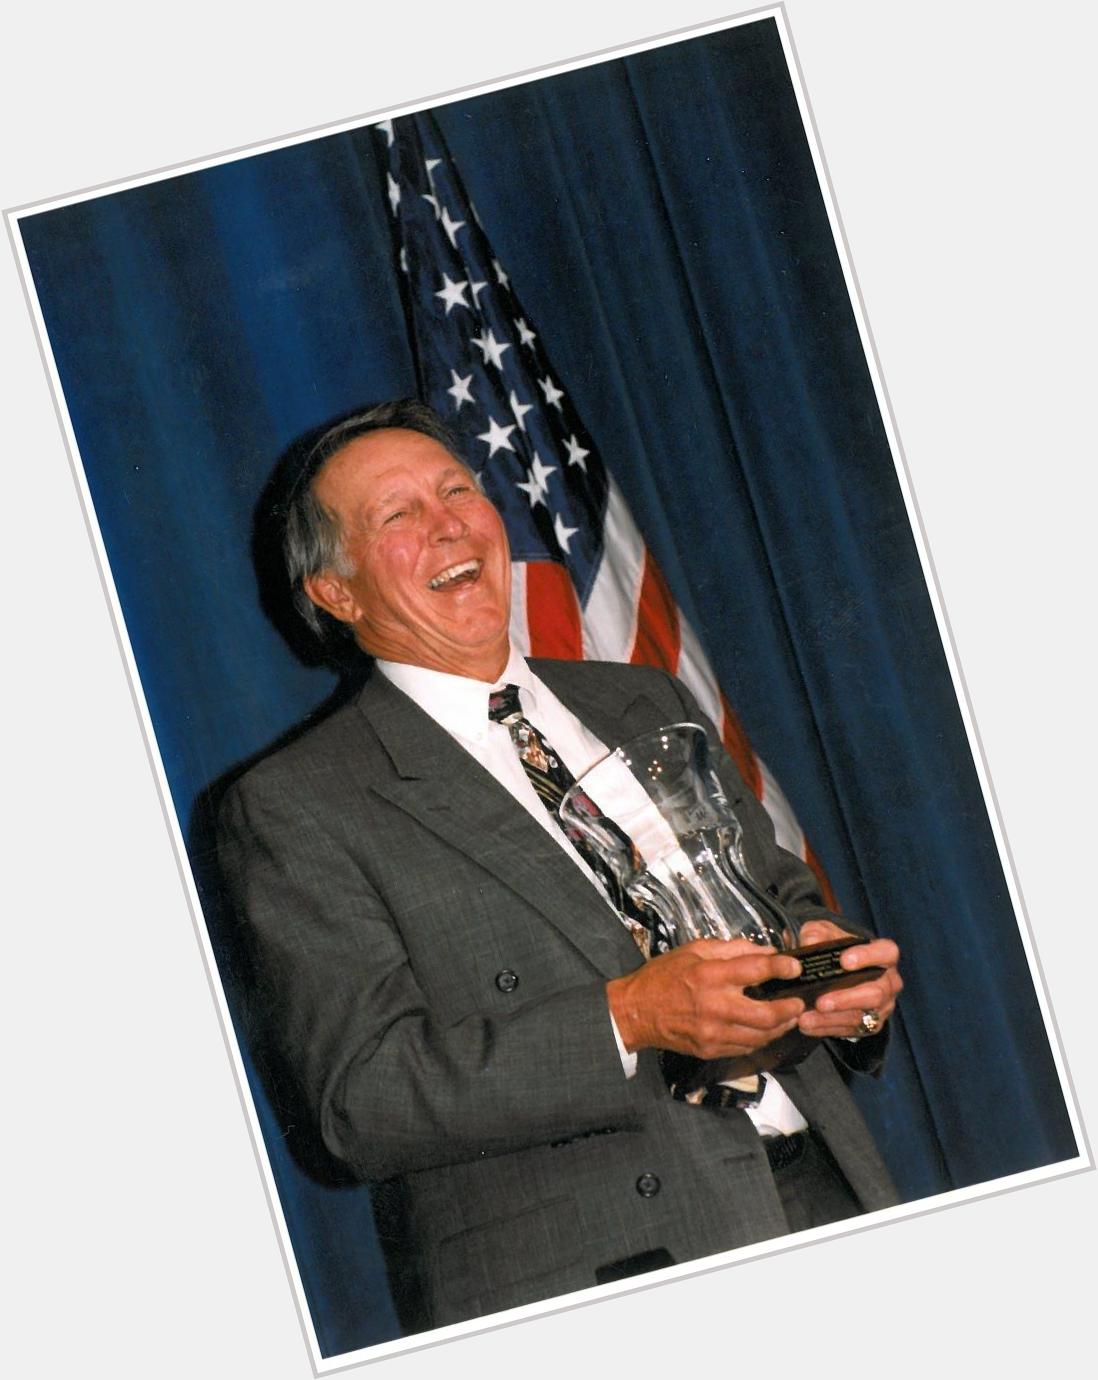 Happy birthday to our president and Hall of Famer Brooks Robinson! We wish you nothing but the best. 